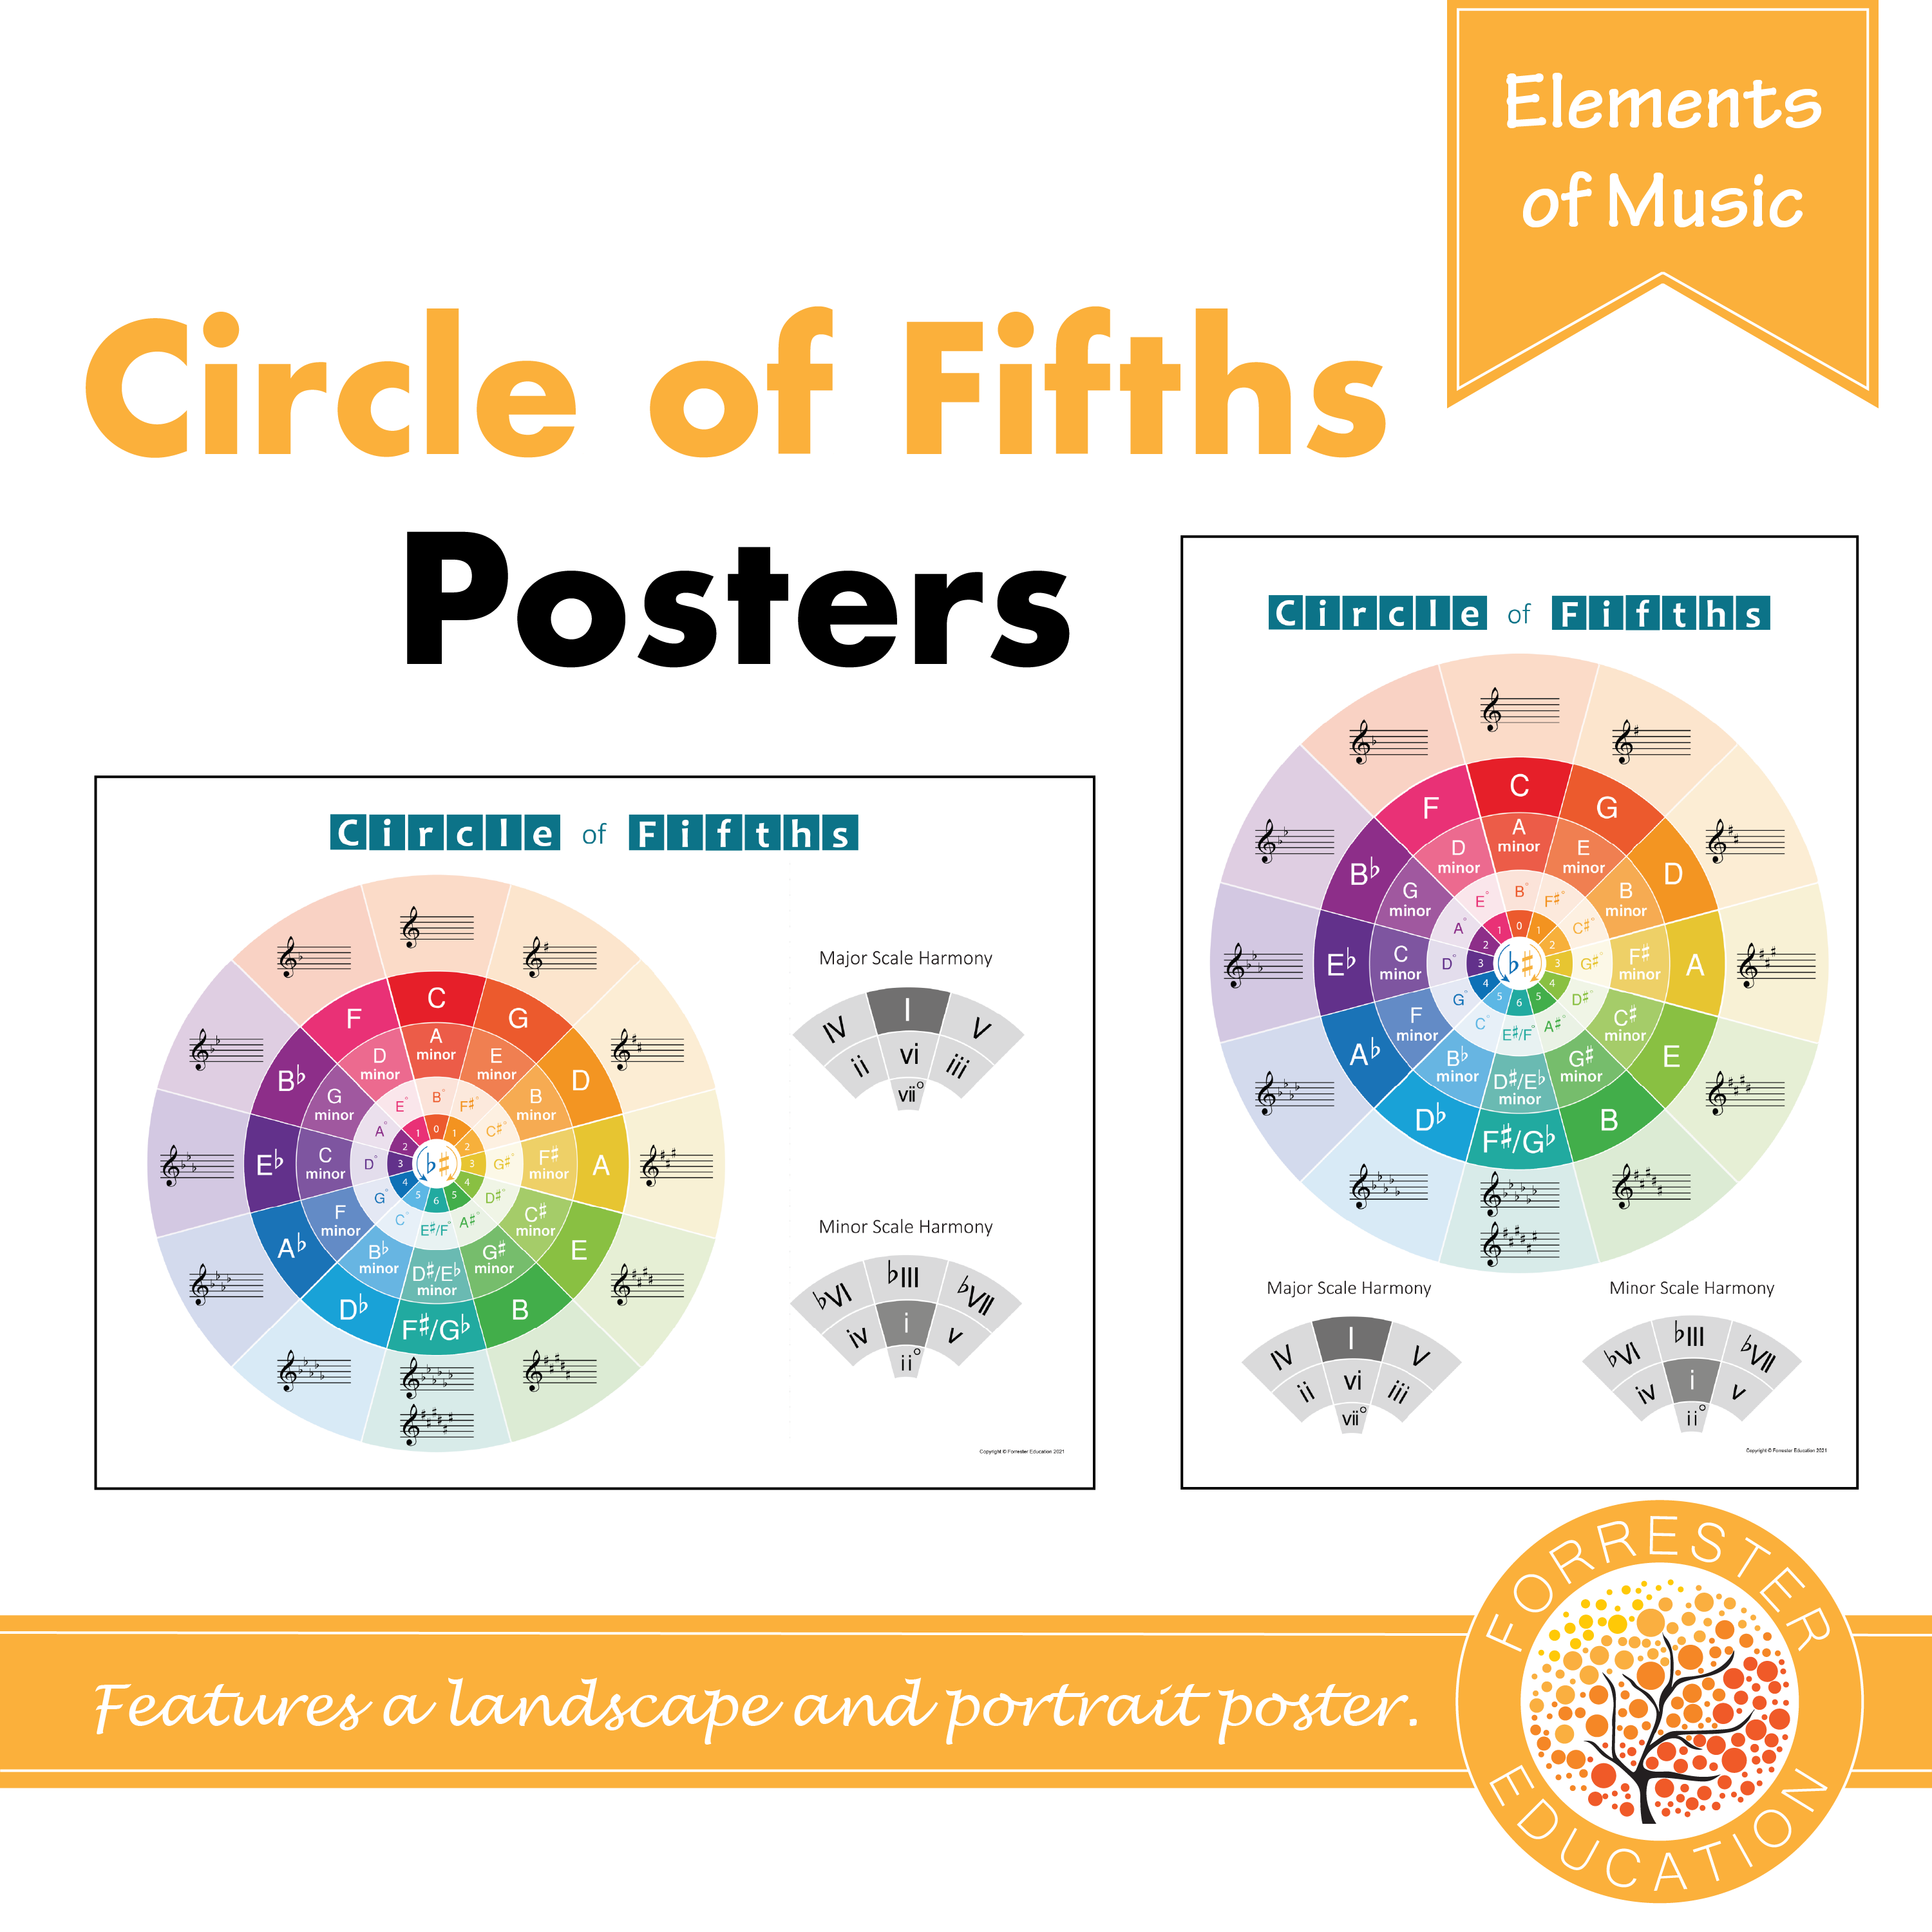 Circle of Fifths Posters